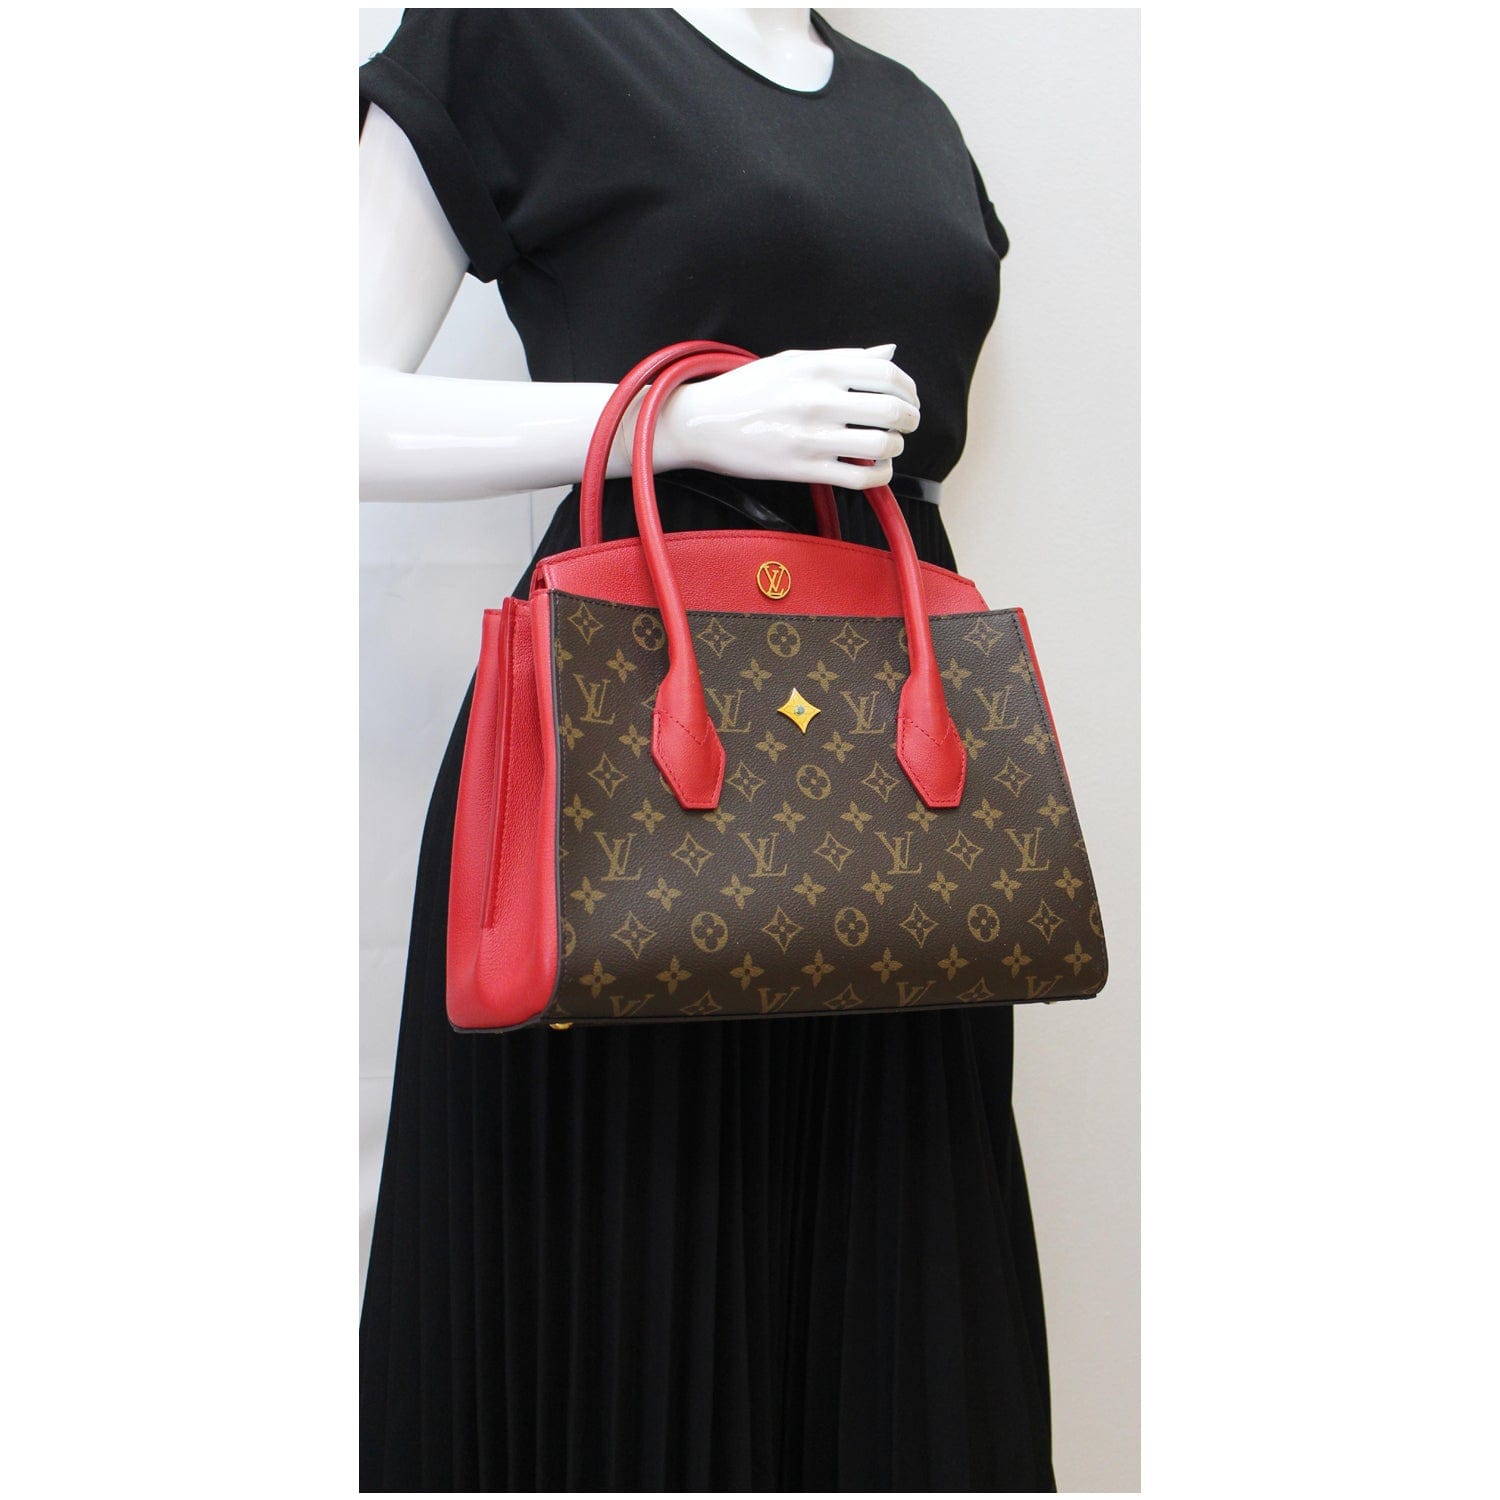 Cleaning and restoring Louis Vuitton brown monogrammed PVC handbags